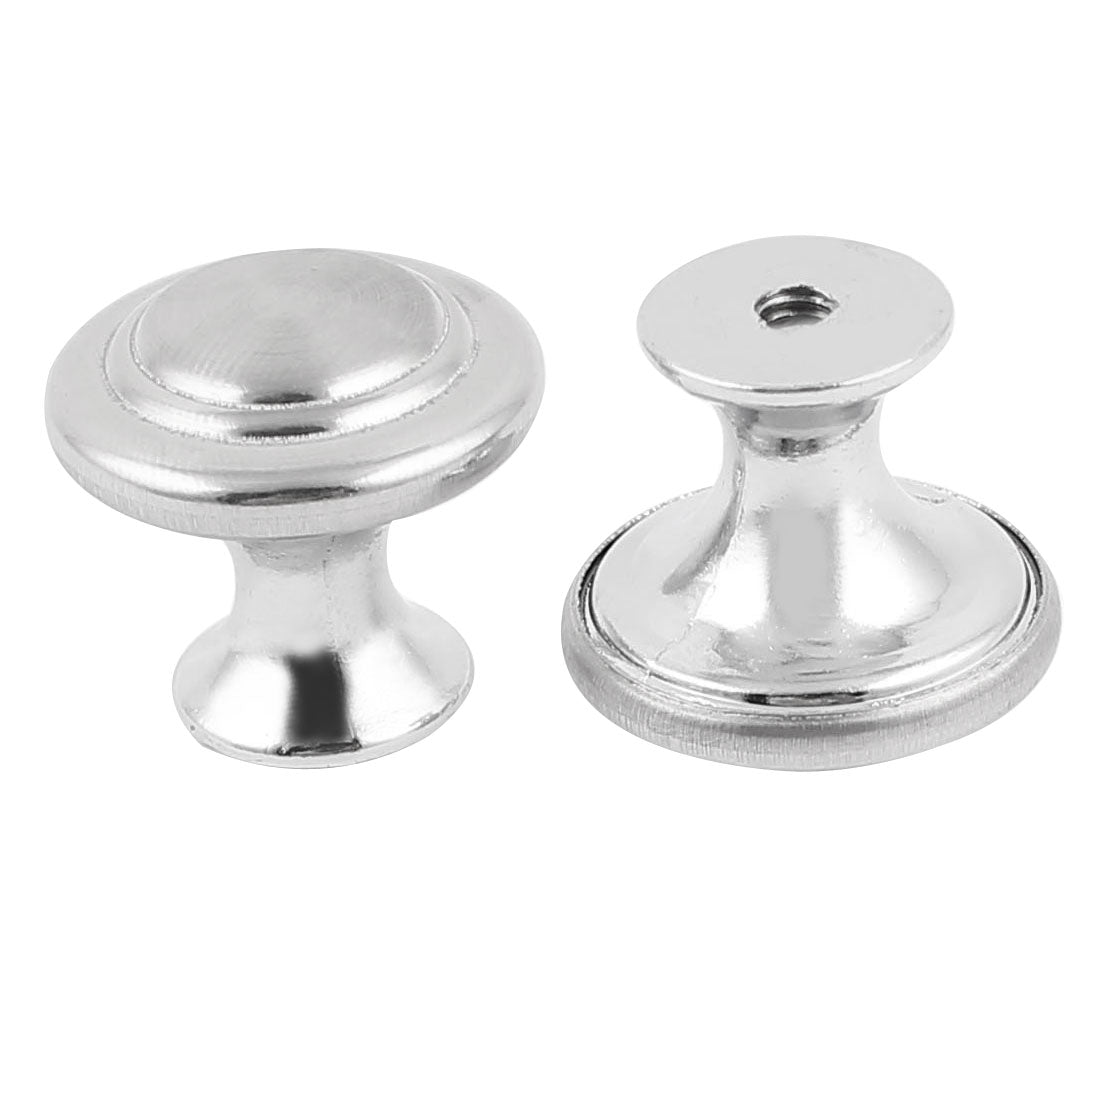 uxcell Uxcell 2 Pcs Cabinet Drawer 24mm Diameter Round Pull Knobs Handle Silver Tone